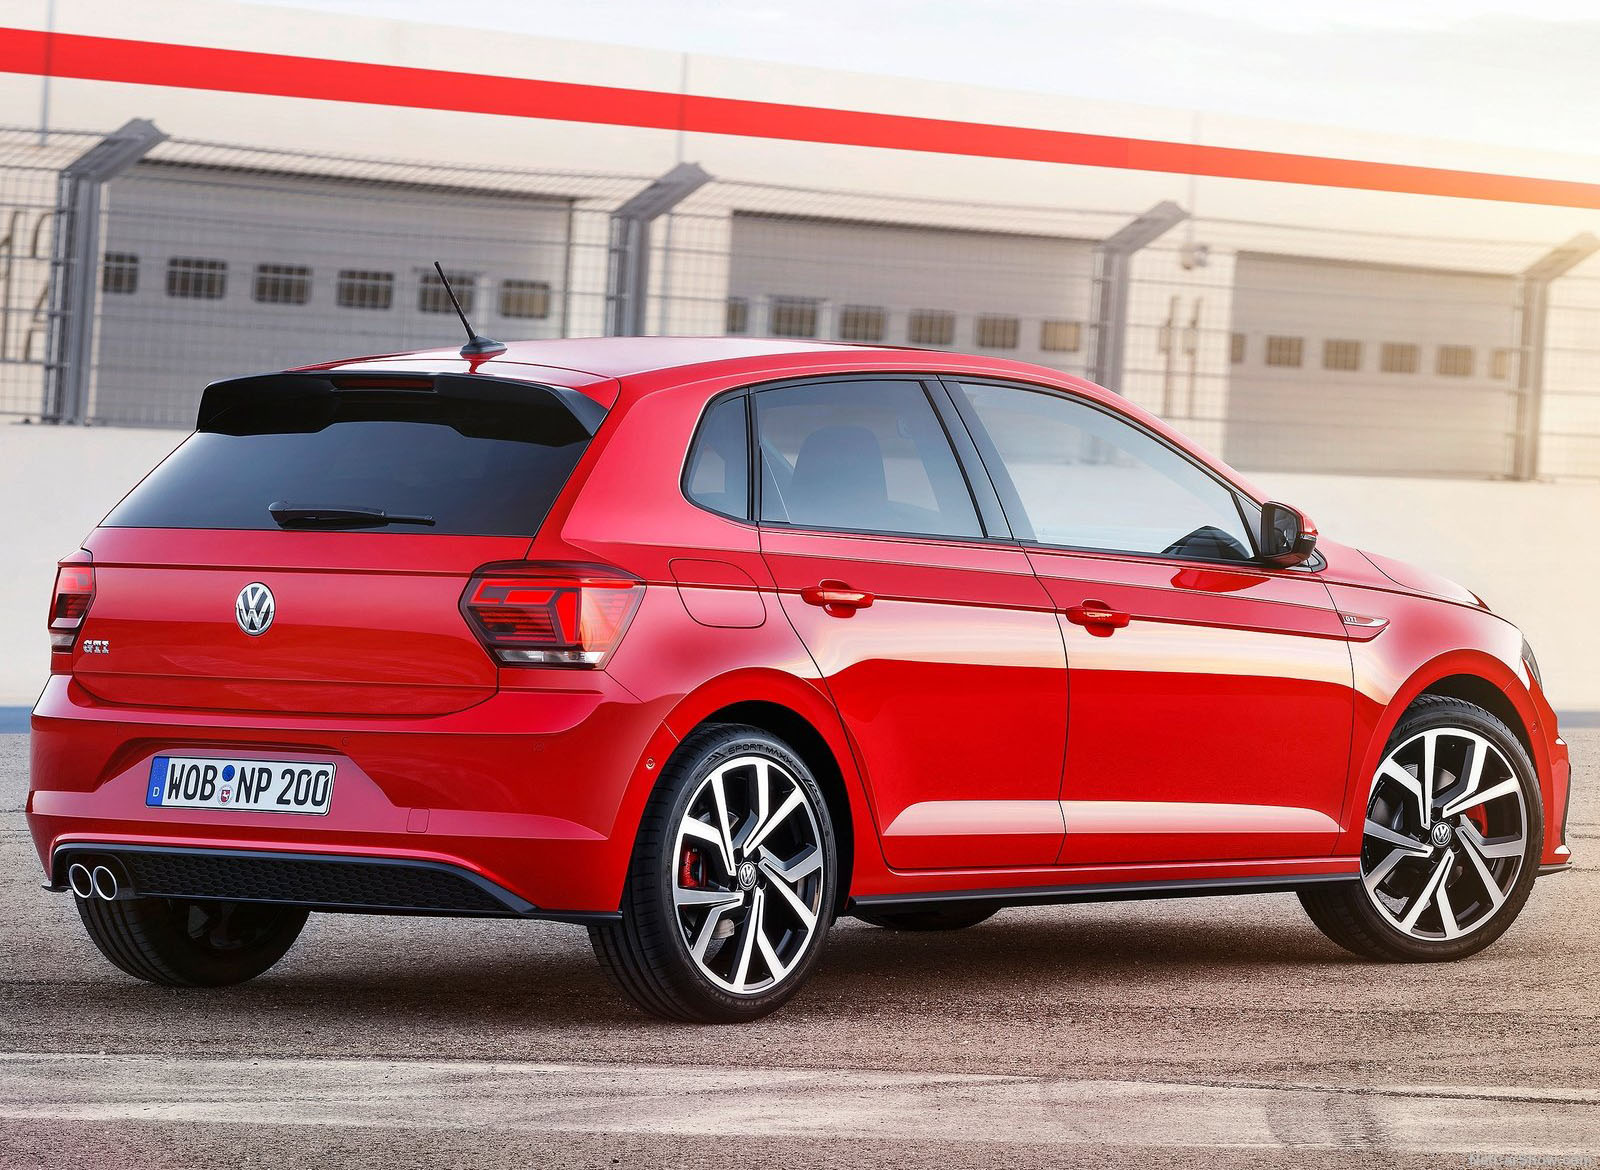 Volkswagen New Polo GTI rear angle view